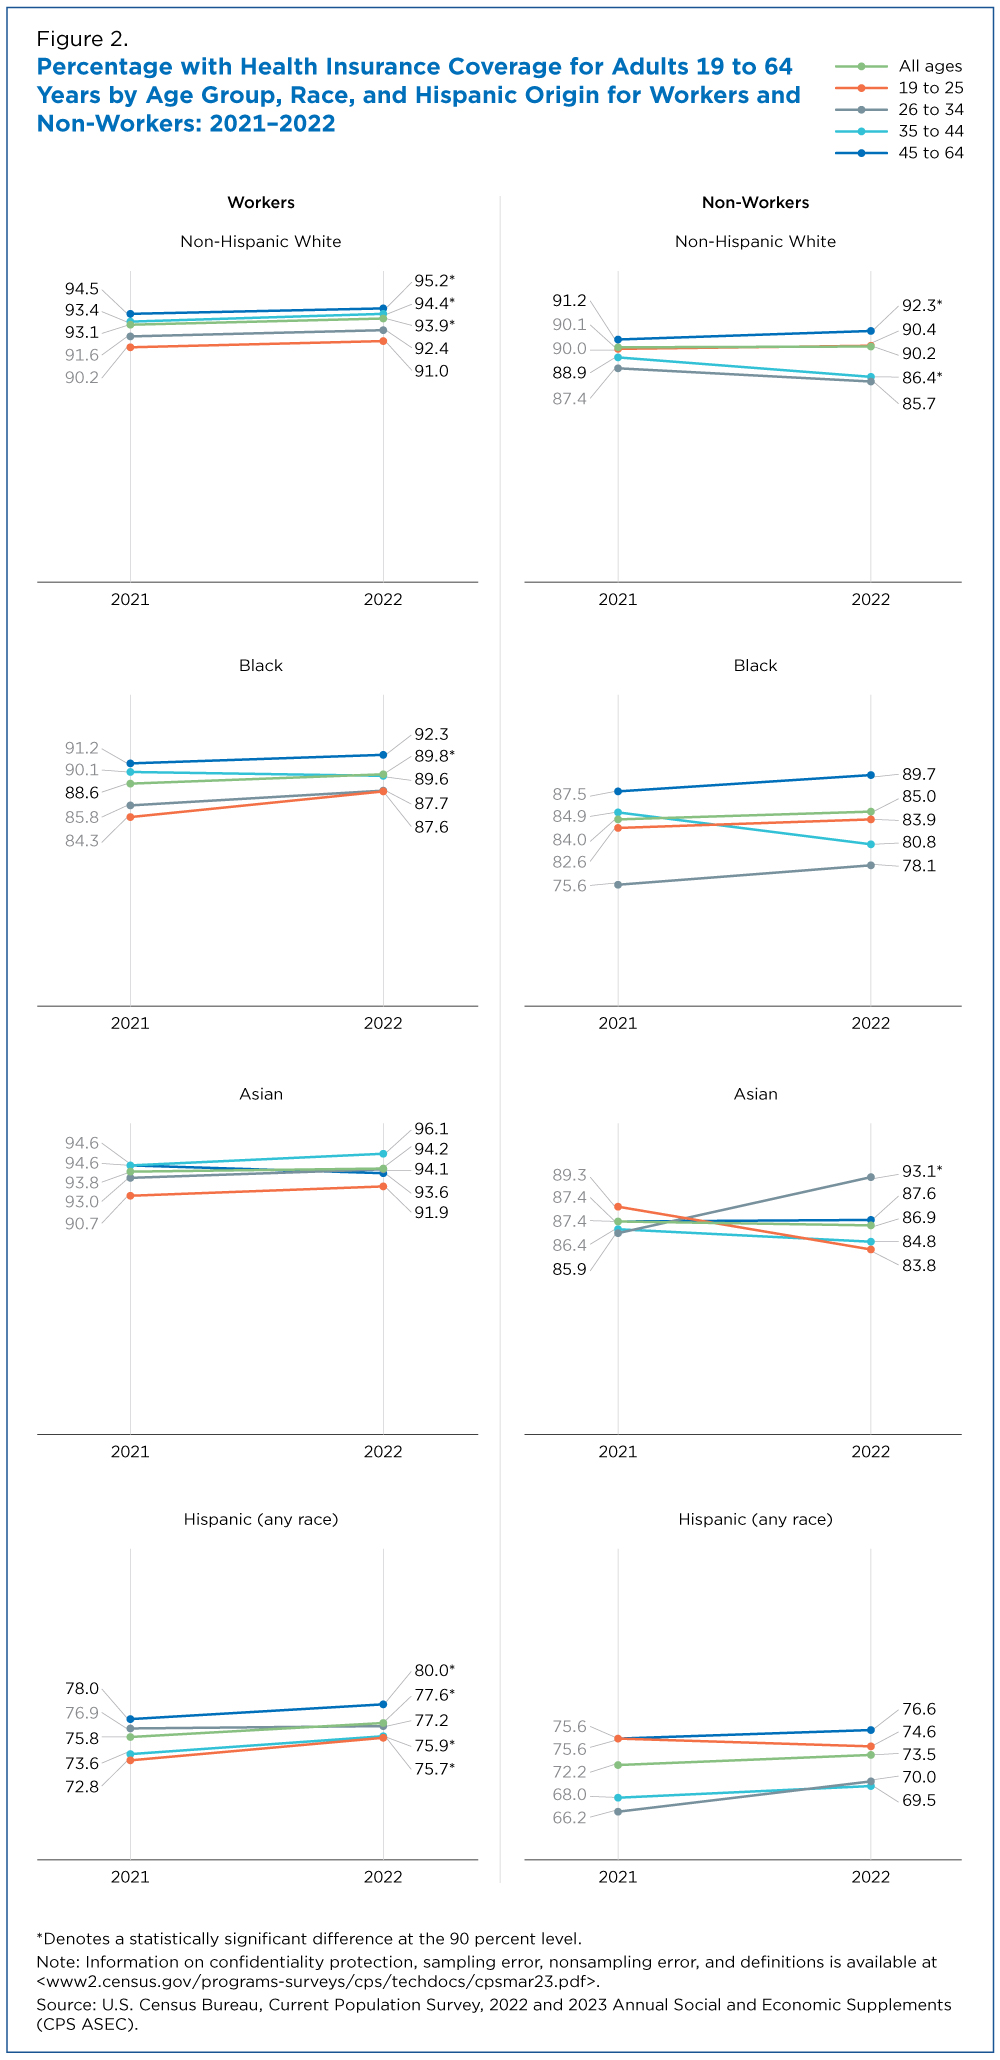 Figure 2. Percentage with Health Insurance Coverage for Adults 19 to 64 Years by Age Group, Race, and Hispanic Origin for Workers and Non-Workers: 2021-2022